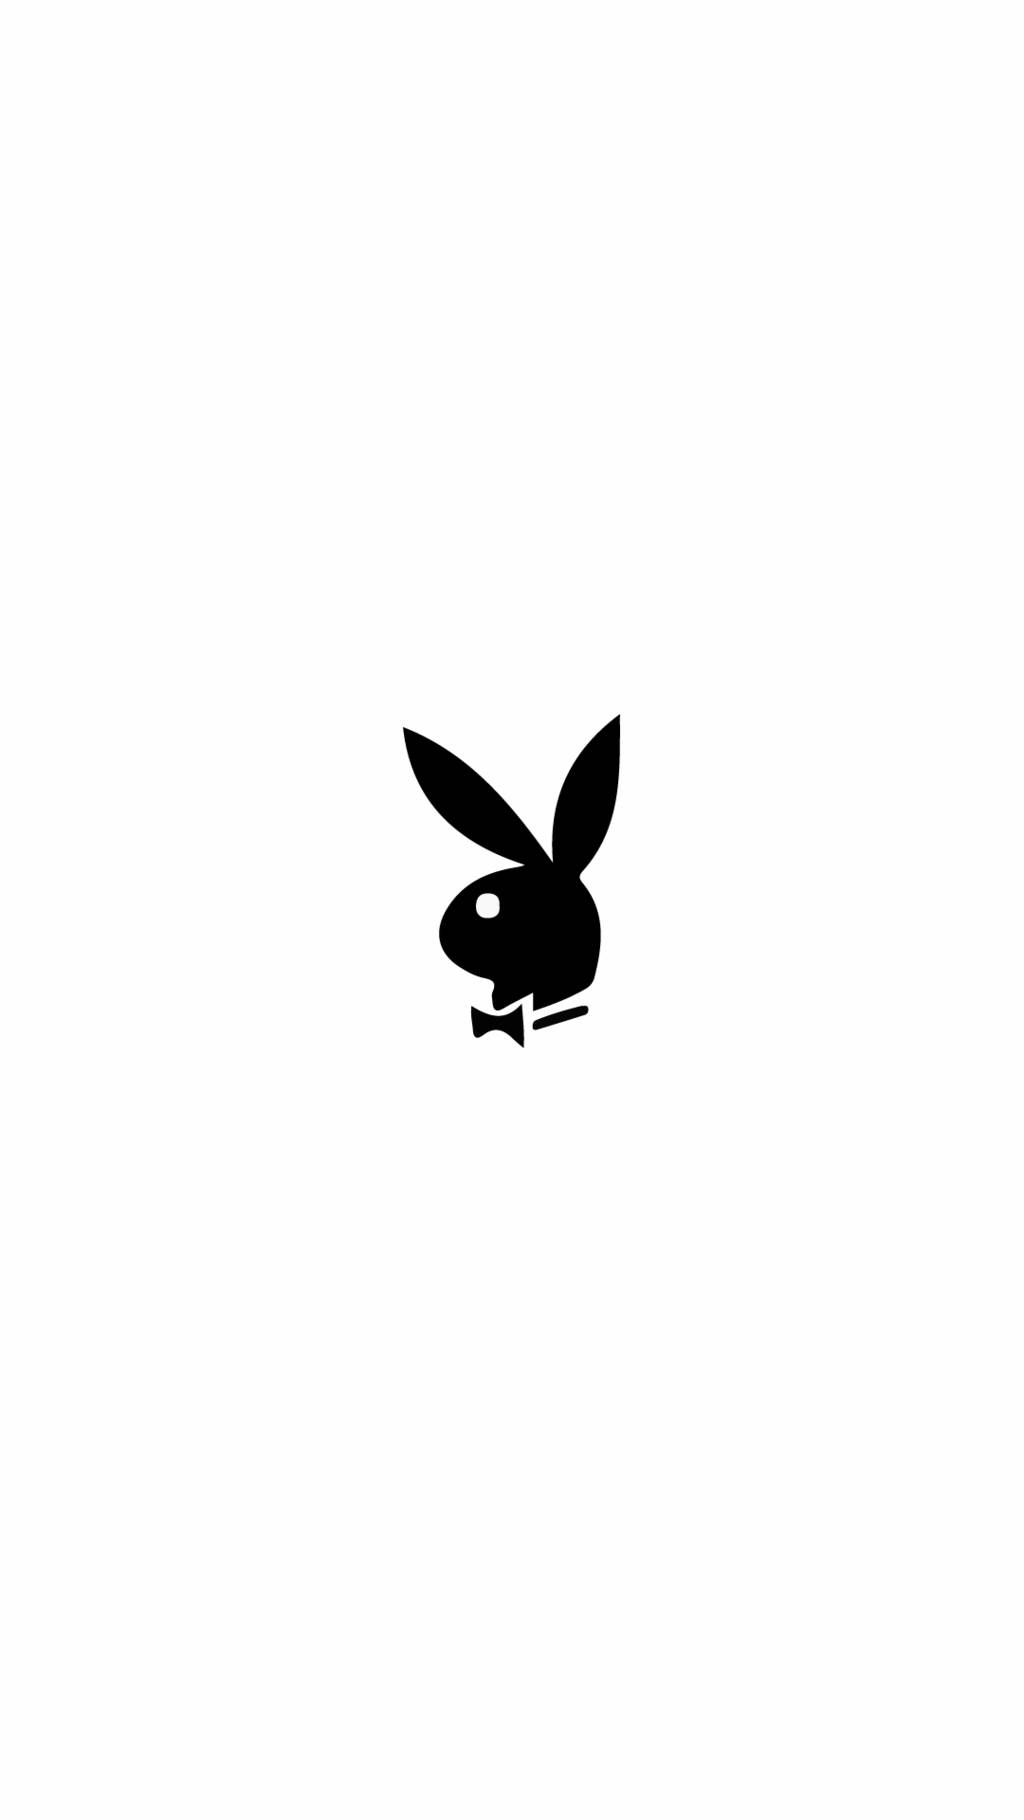 Playboy Logo Aesthetic Wallpapers - Wallpaper Cave